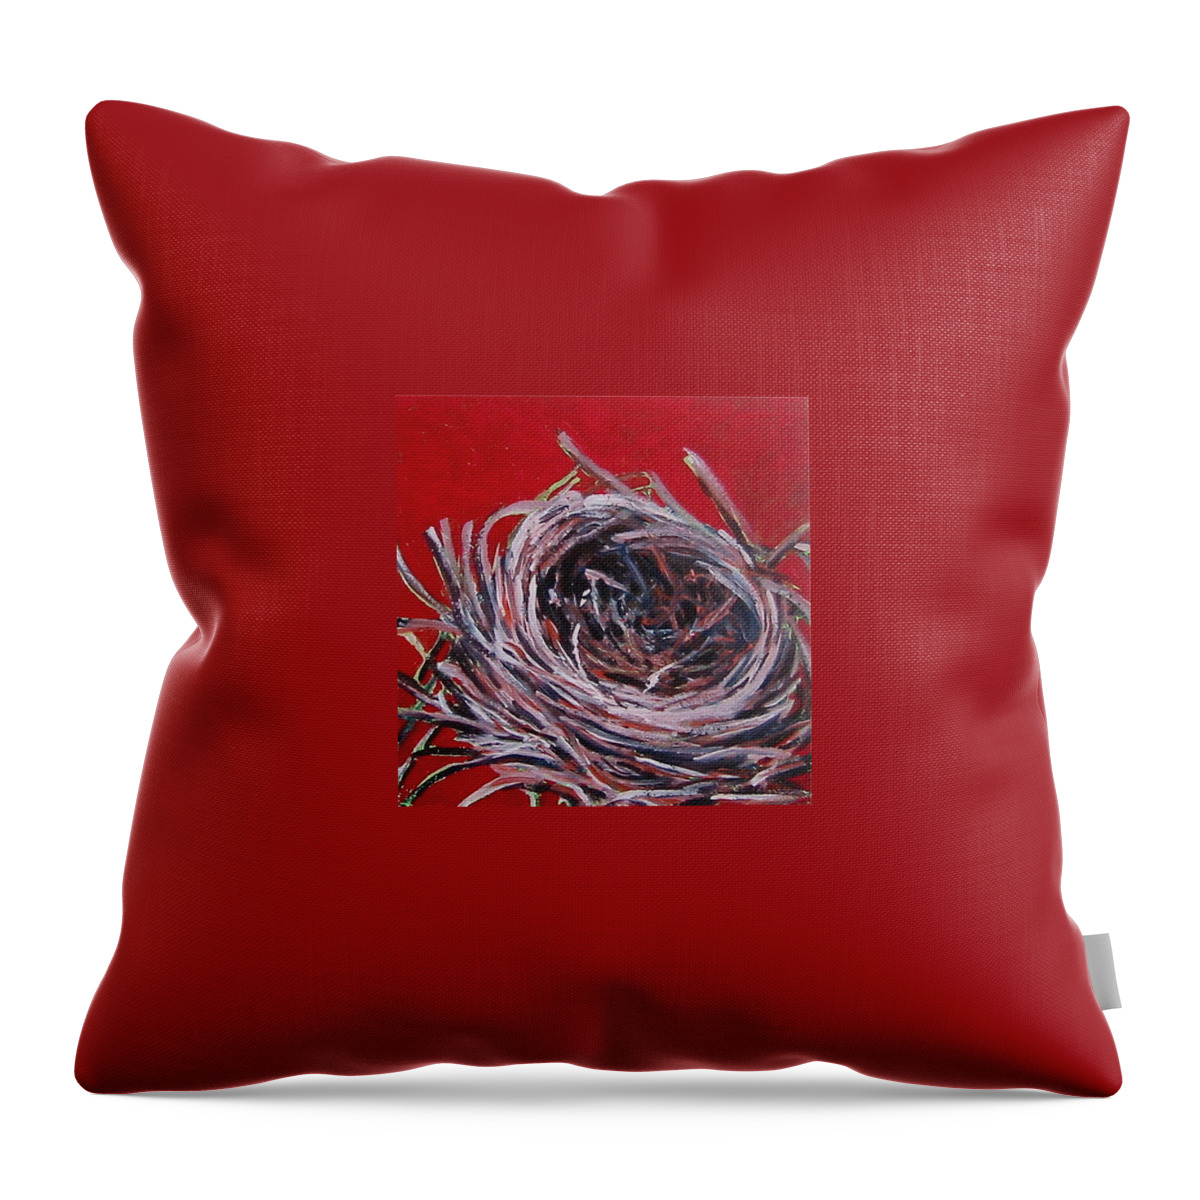 Still Life Throw Pillow featuring the painting Small Nest on red by Tilly Strauss